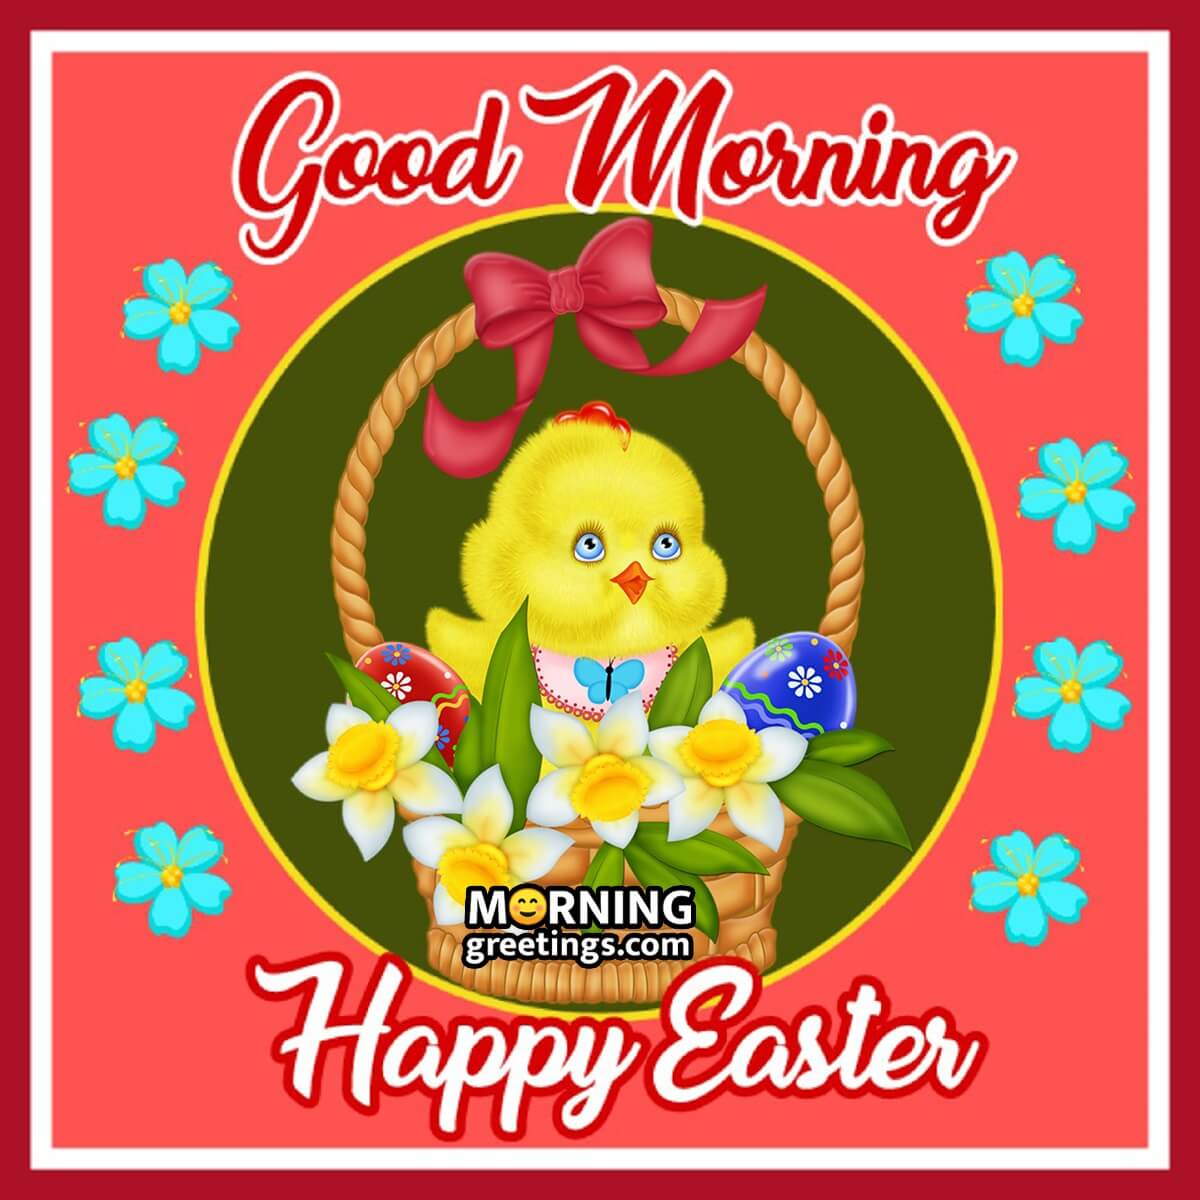 Good Morning Happy Easter Greeting